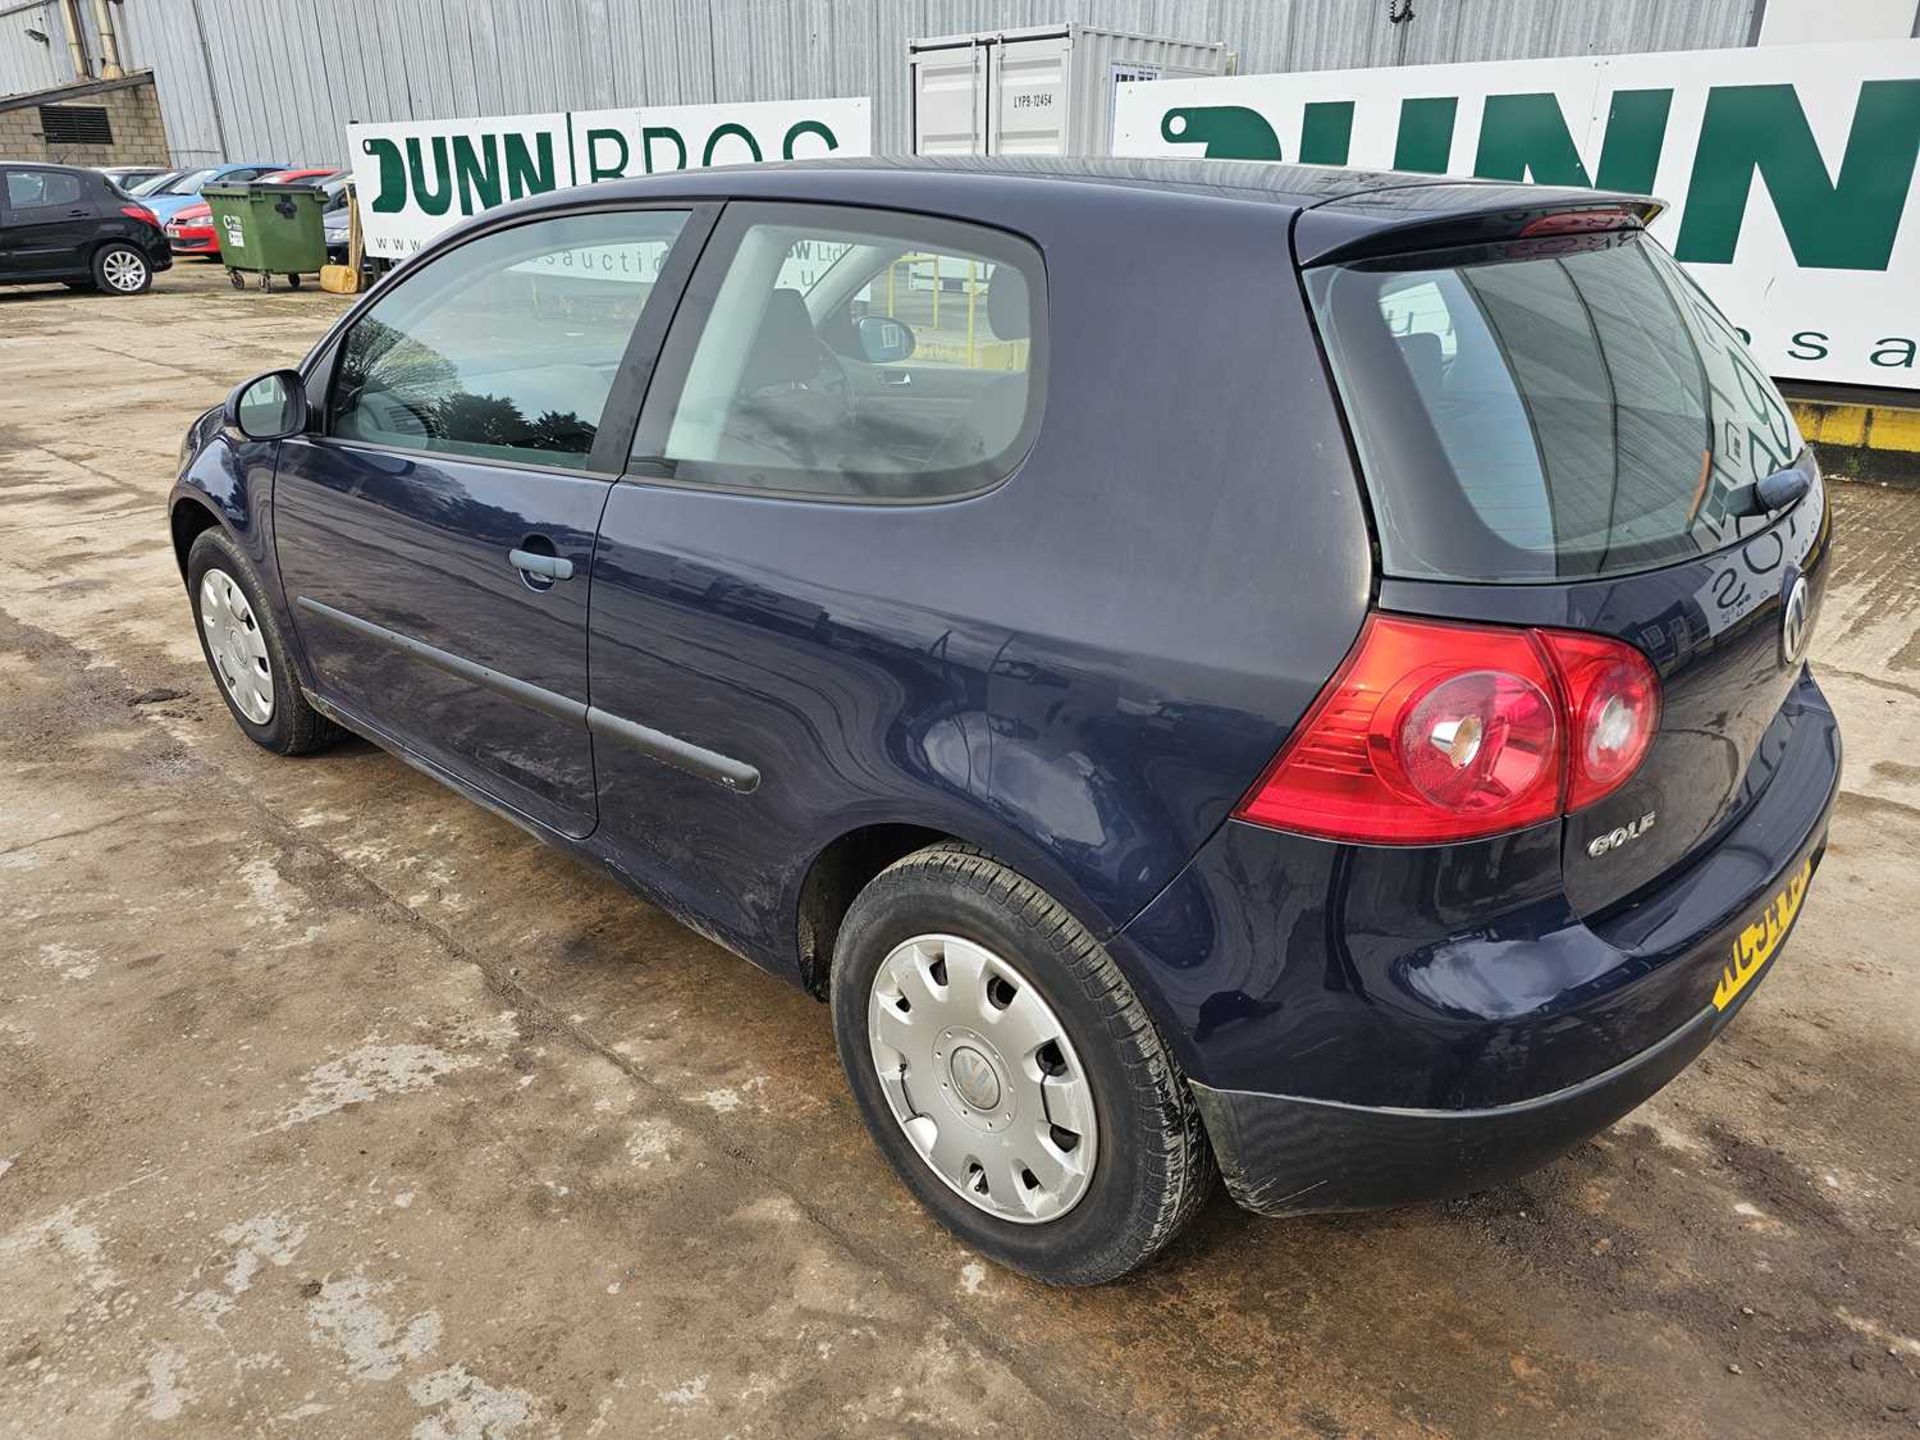 2005 Volkswagen Golf FSi S, 5 Speed, A/C (Reg. Docs. Available) - Image 6 of 27